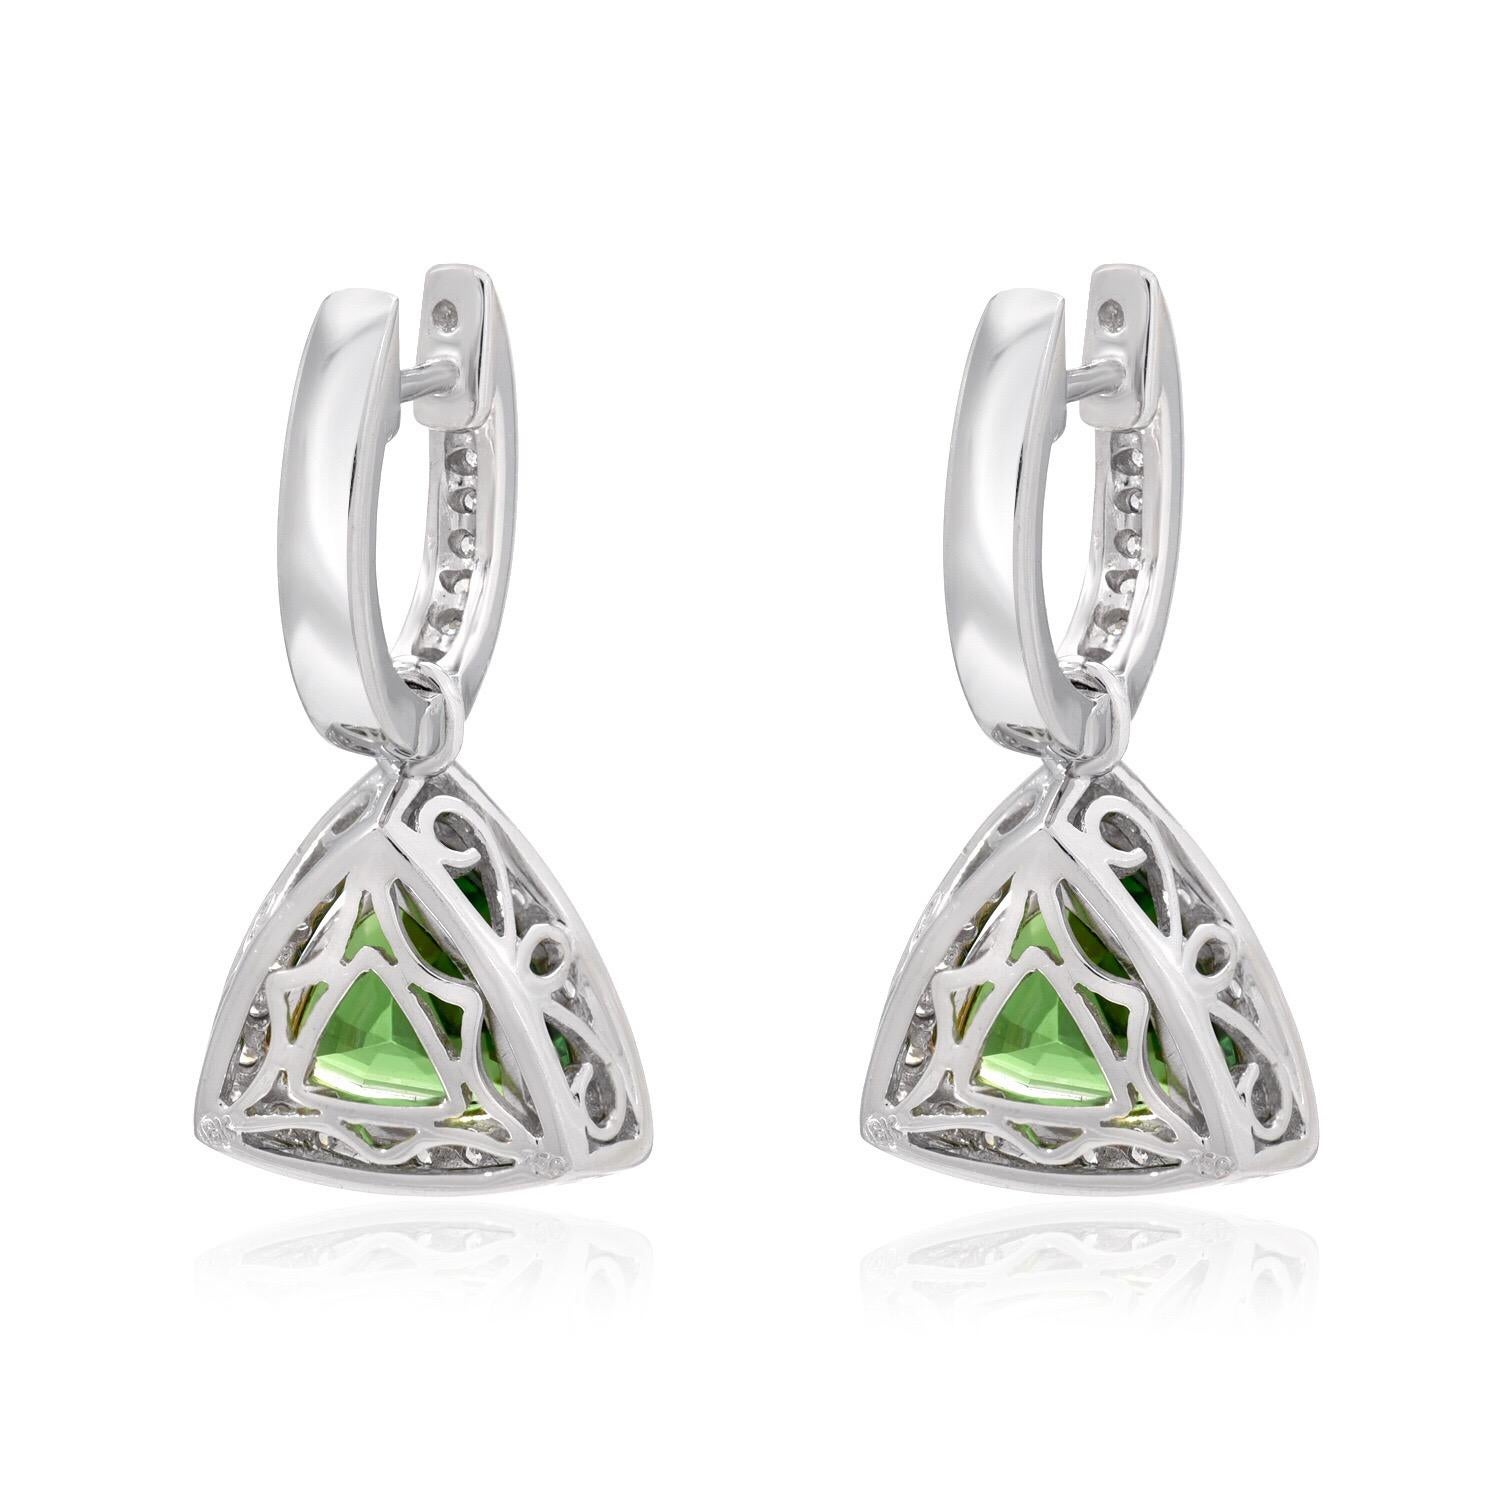 Vivid pair of Tsavorite Garnet Trillions, weighing a total of 3.50 carats, are set in these drop lever back 18K white gold earrings for women, adorned by a total of 0.45 carats of round brilliant diamonds.
0.75 inches in length.
Returns are accepted